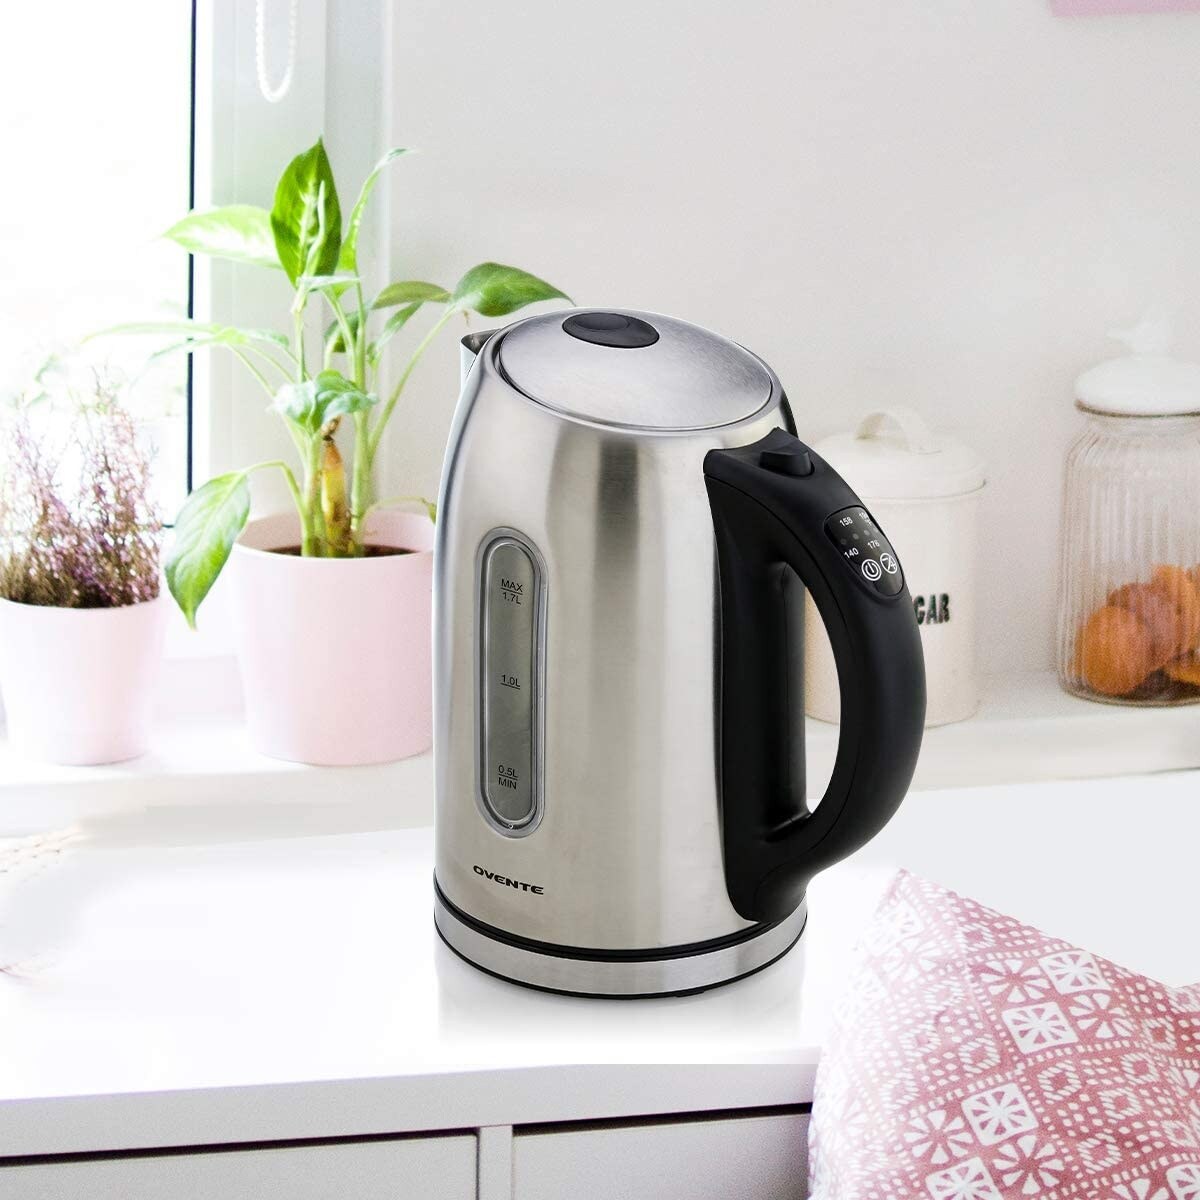 https://ak1.ostkcdn.com/images/products/is/images/direct/71ce0fe287c540ec4b32a7758ad90e6f8fa52c91/Ovente-Electric-Kettle-1.7L-with-5-Temperature-Settings%2C-Silver-KS88S.jpg